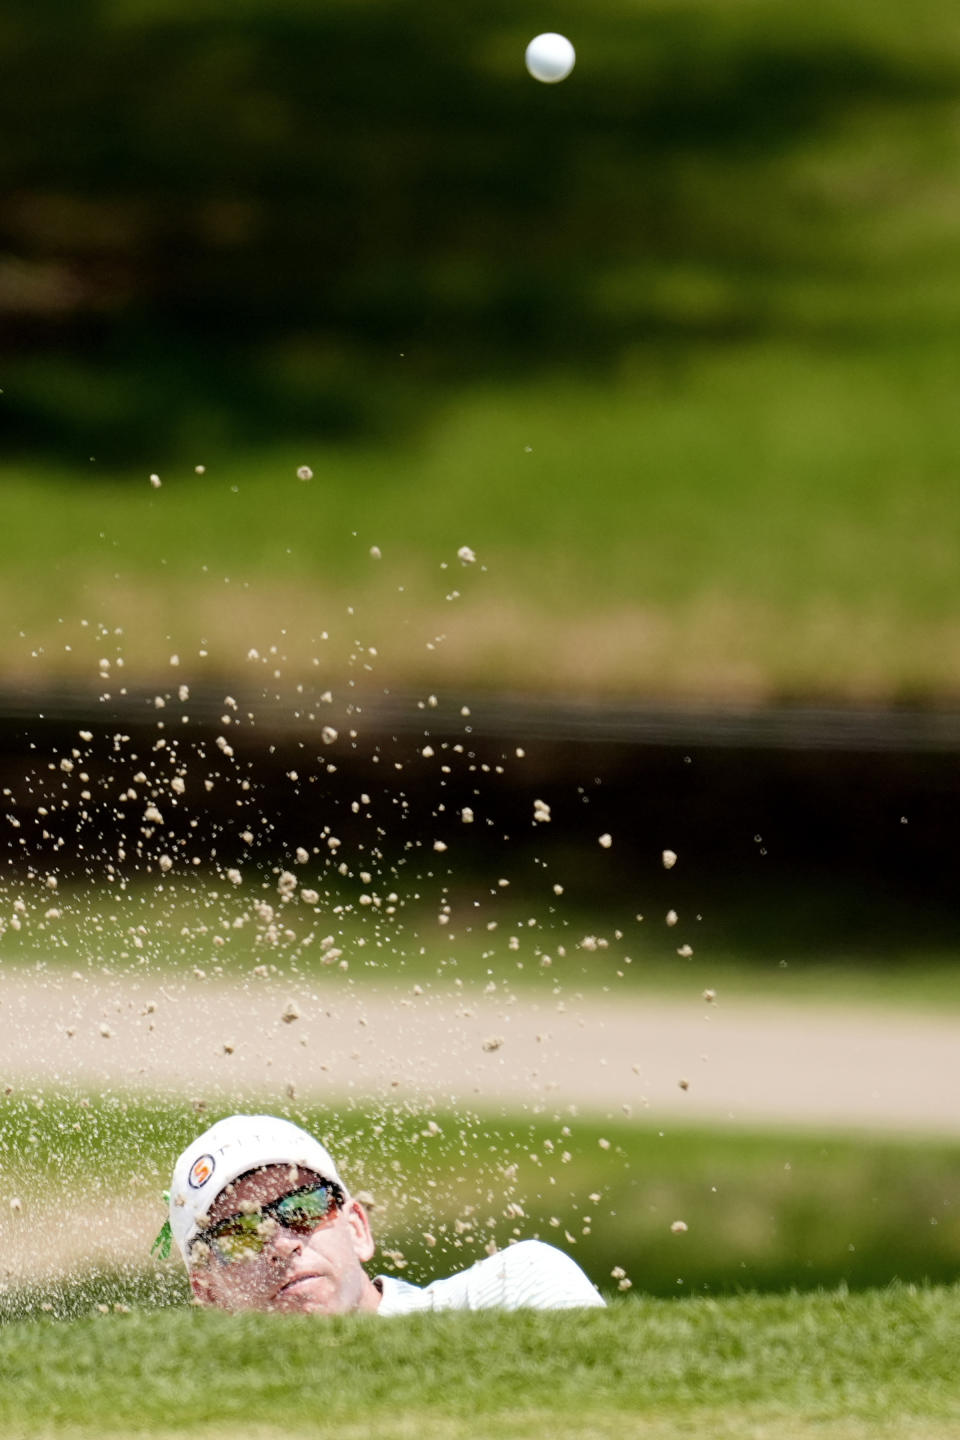 Ben Kohles hits his ball out of the sand on the first hole during the third round of the Byron Nelson golf tournament in McKinney, Texas, Saturday, May 4, 2024. (AP Photo/LM Otero)